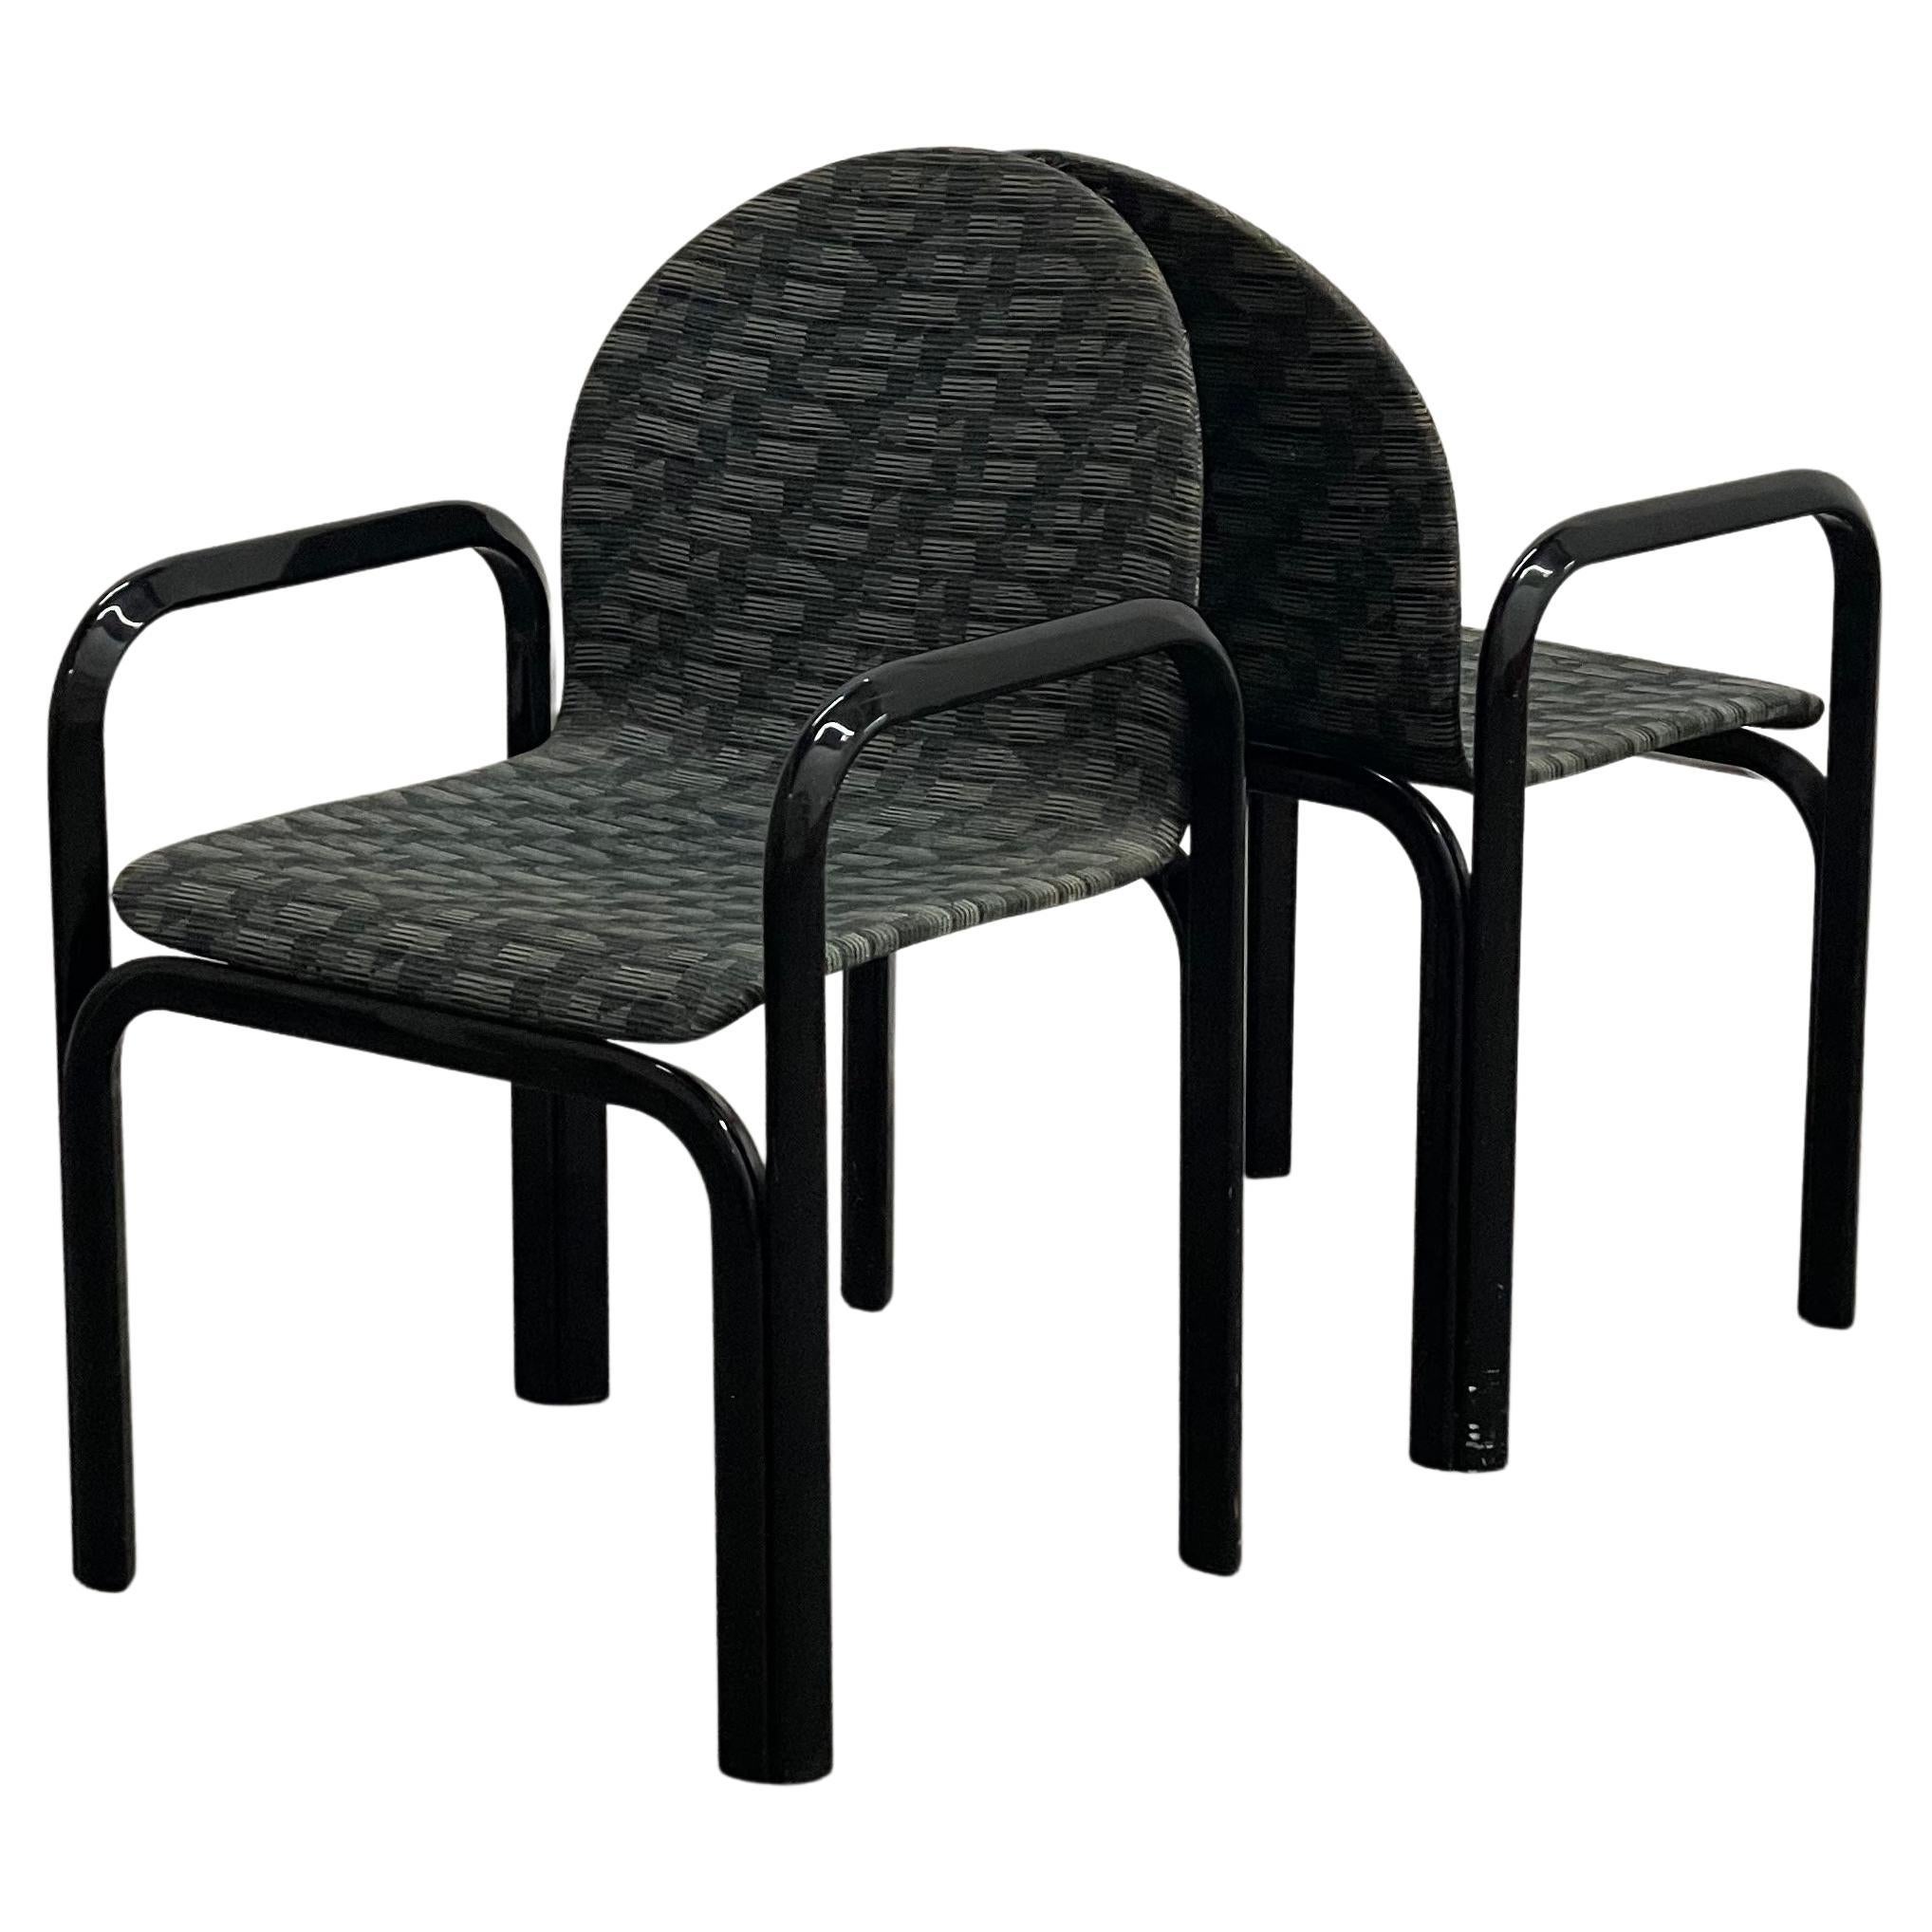 Set of 2 "Orsay" Chairs by Gae Aulenti for Knoll International, 1970s